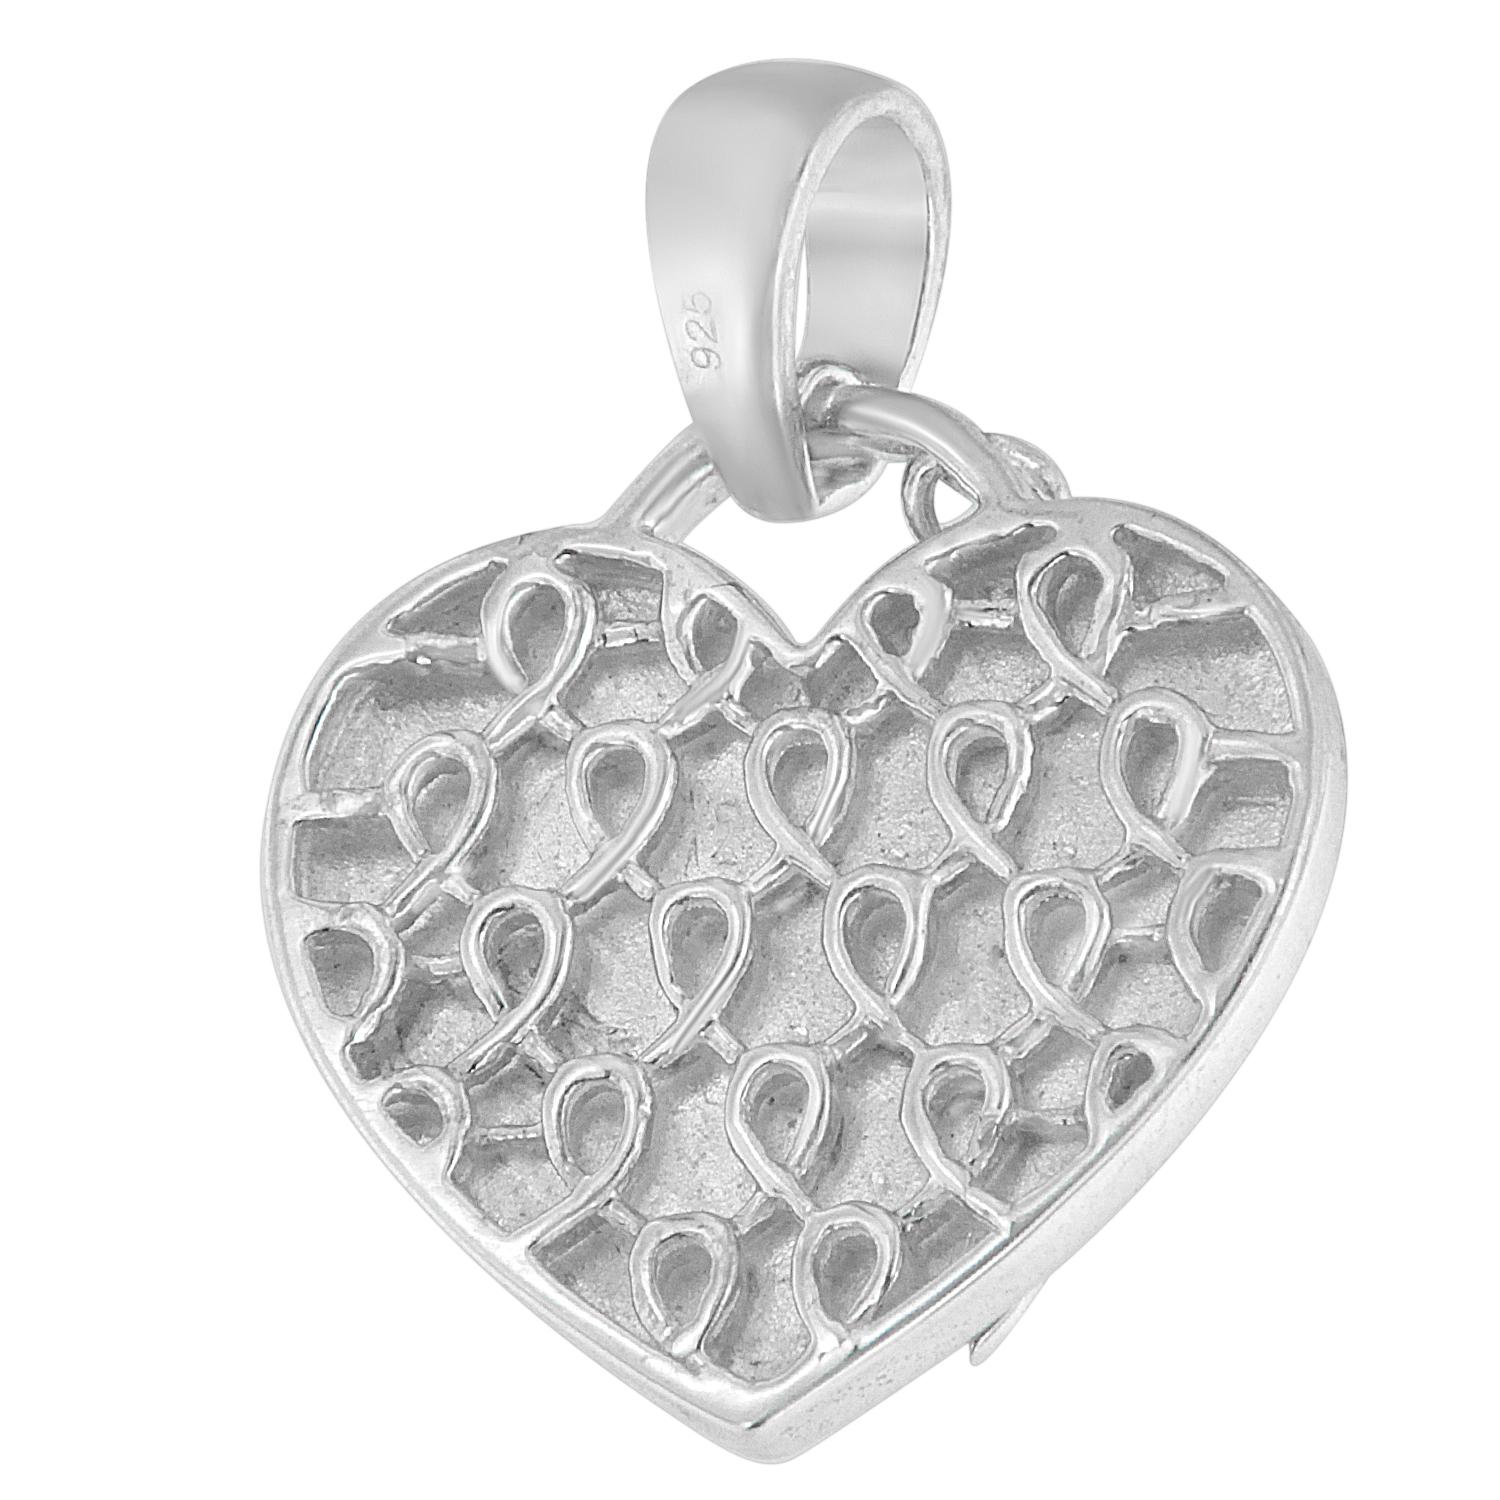 Adorn your neckline with timeless elegance. Crafted from .925 sterling silver, this pendant necklace features a heart-shaped design, symbolizing love and affection. Twelve natural, round-cut diamonds, totaling 0.10 cttw, adorn the pendant, radiating